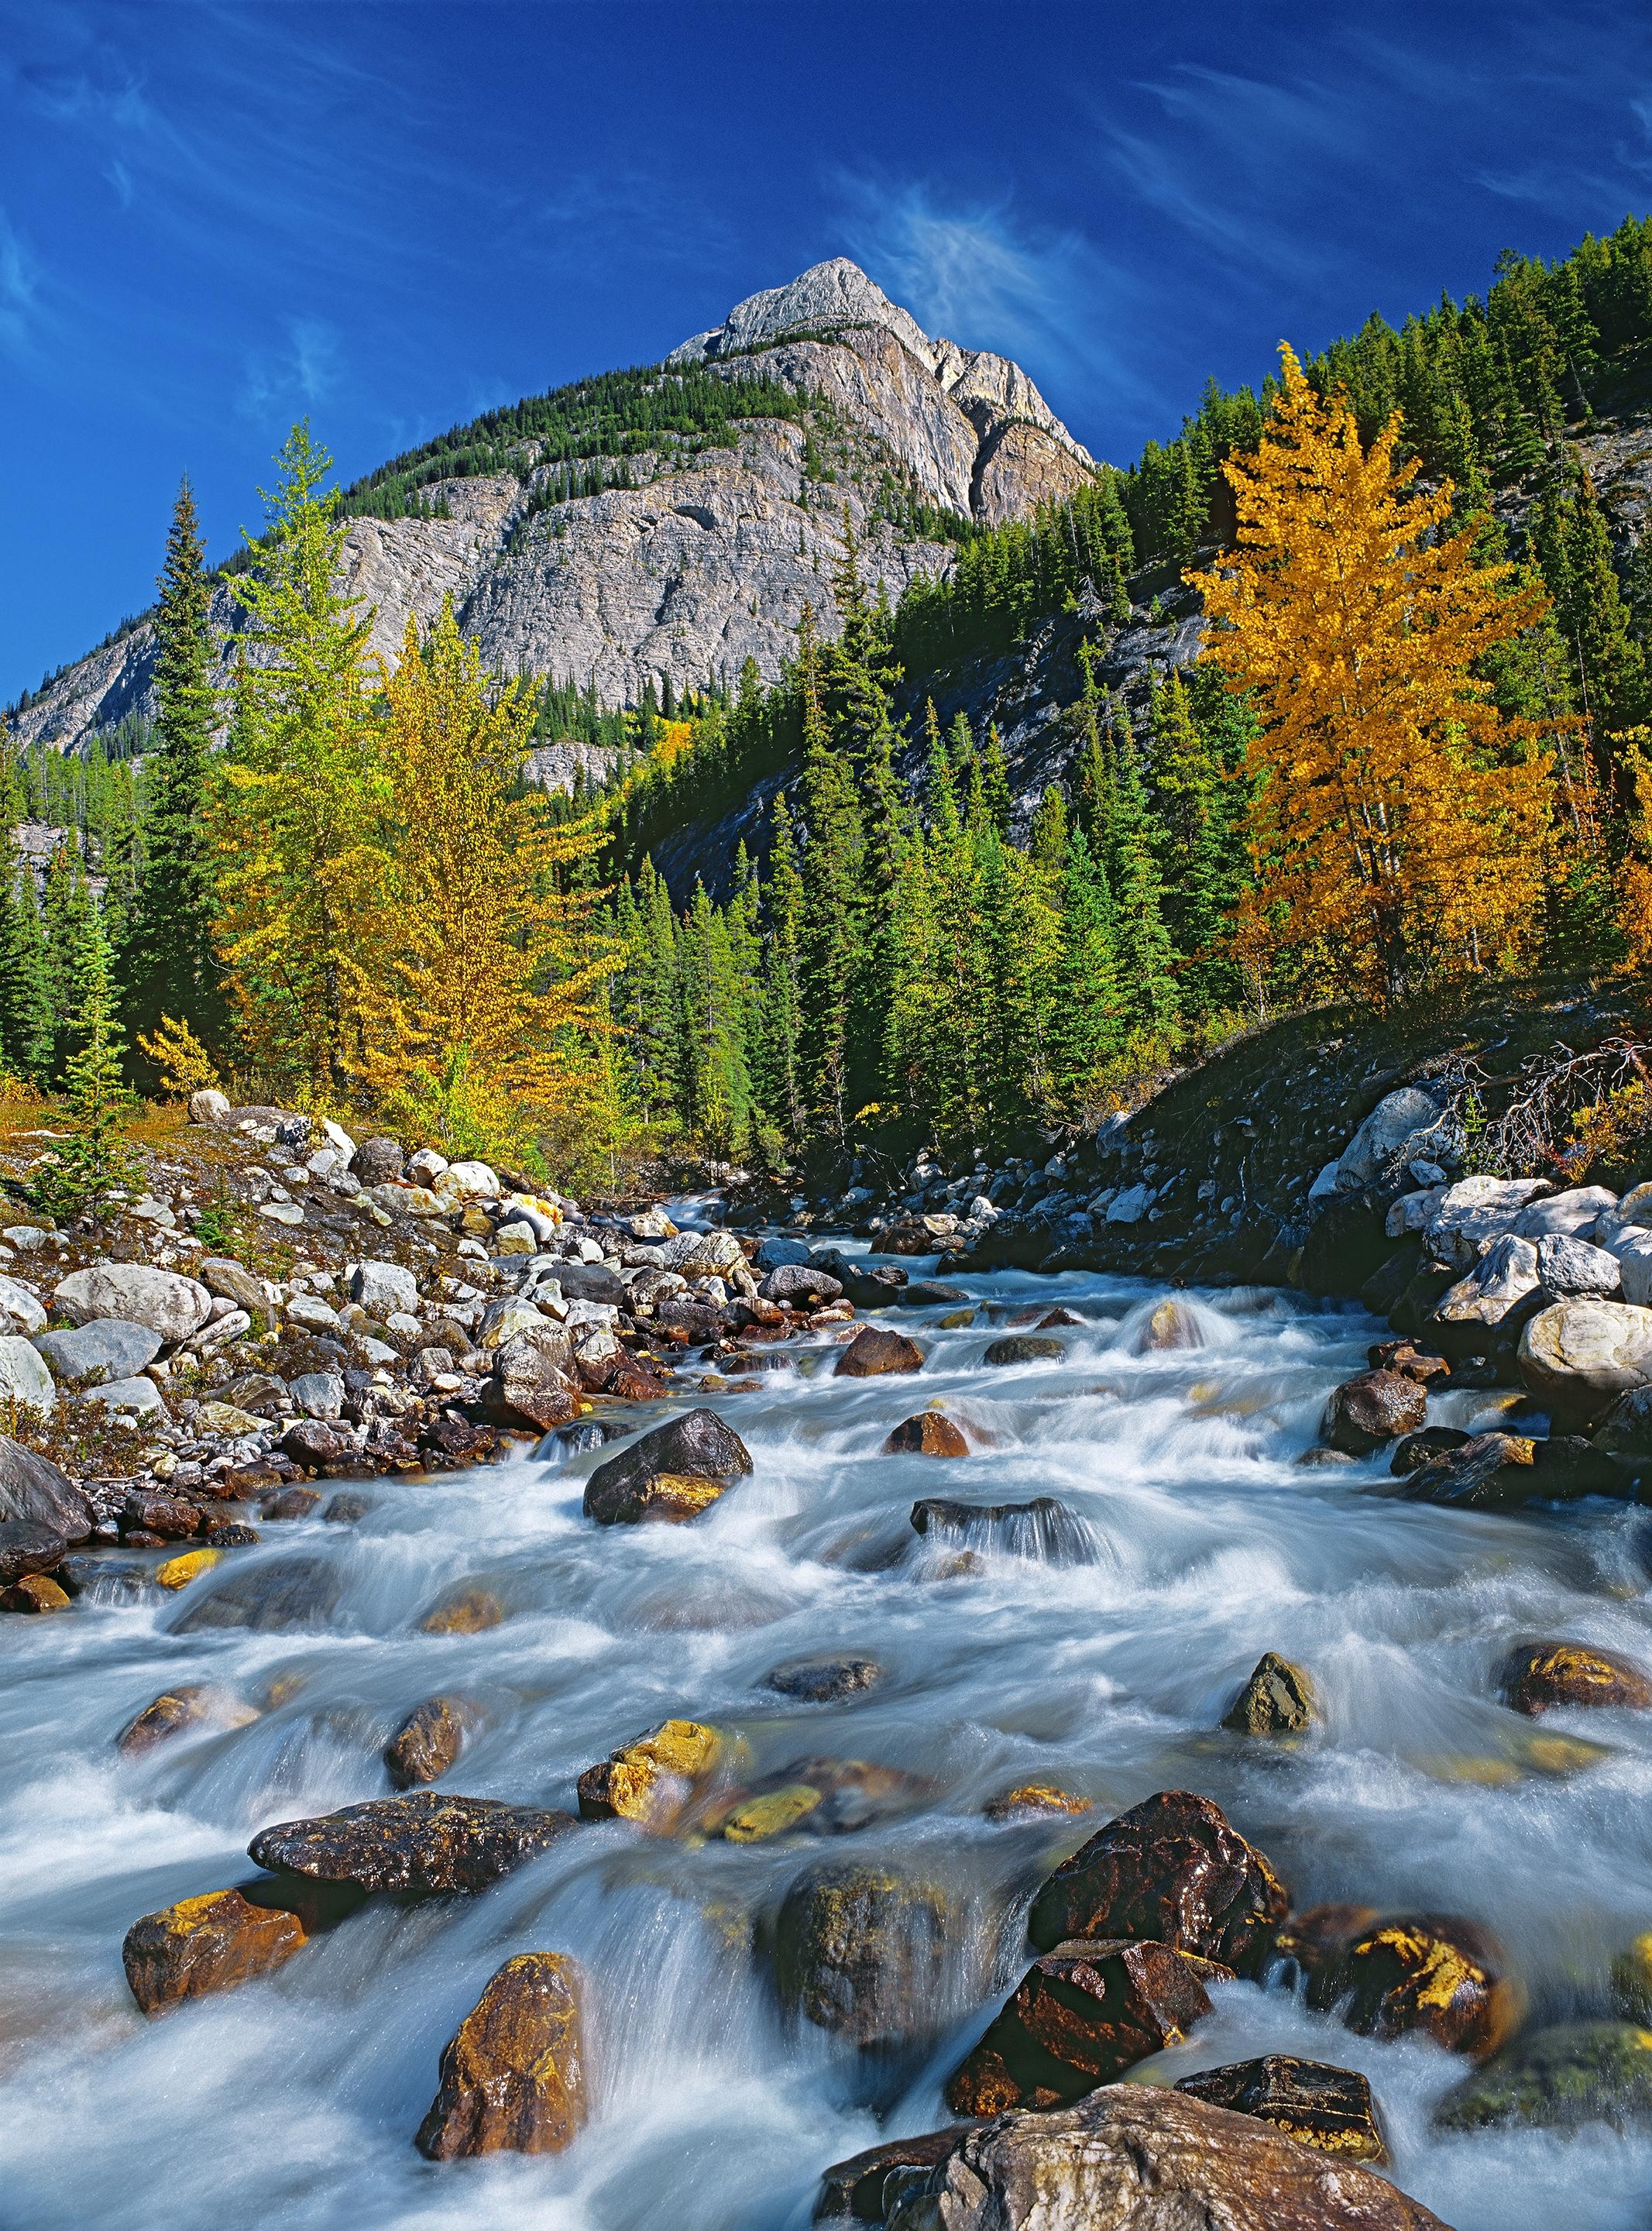 â€˜Rampart Creek, Banffâ€™ by Mike Grandmaison Banff National Park, Alberta. Canada  The drive along the Icefields Parkway through the Canadian Rocky Mountains offers some of the most breathtaking scenery in the world like Rampart Creek in Banff